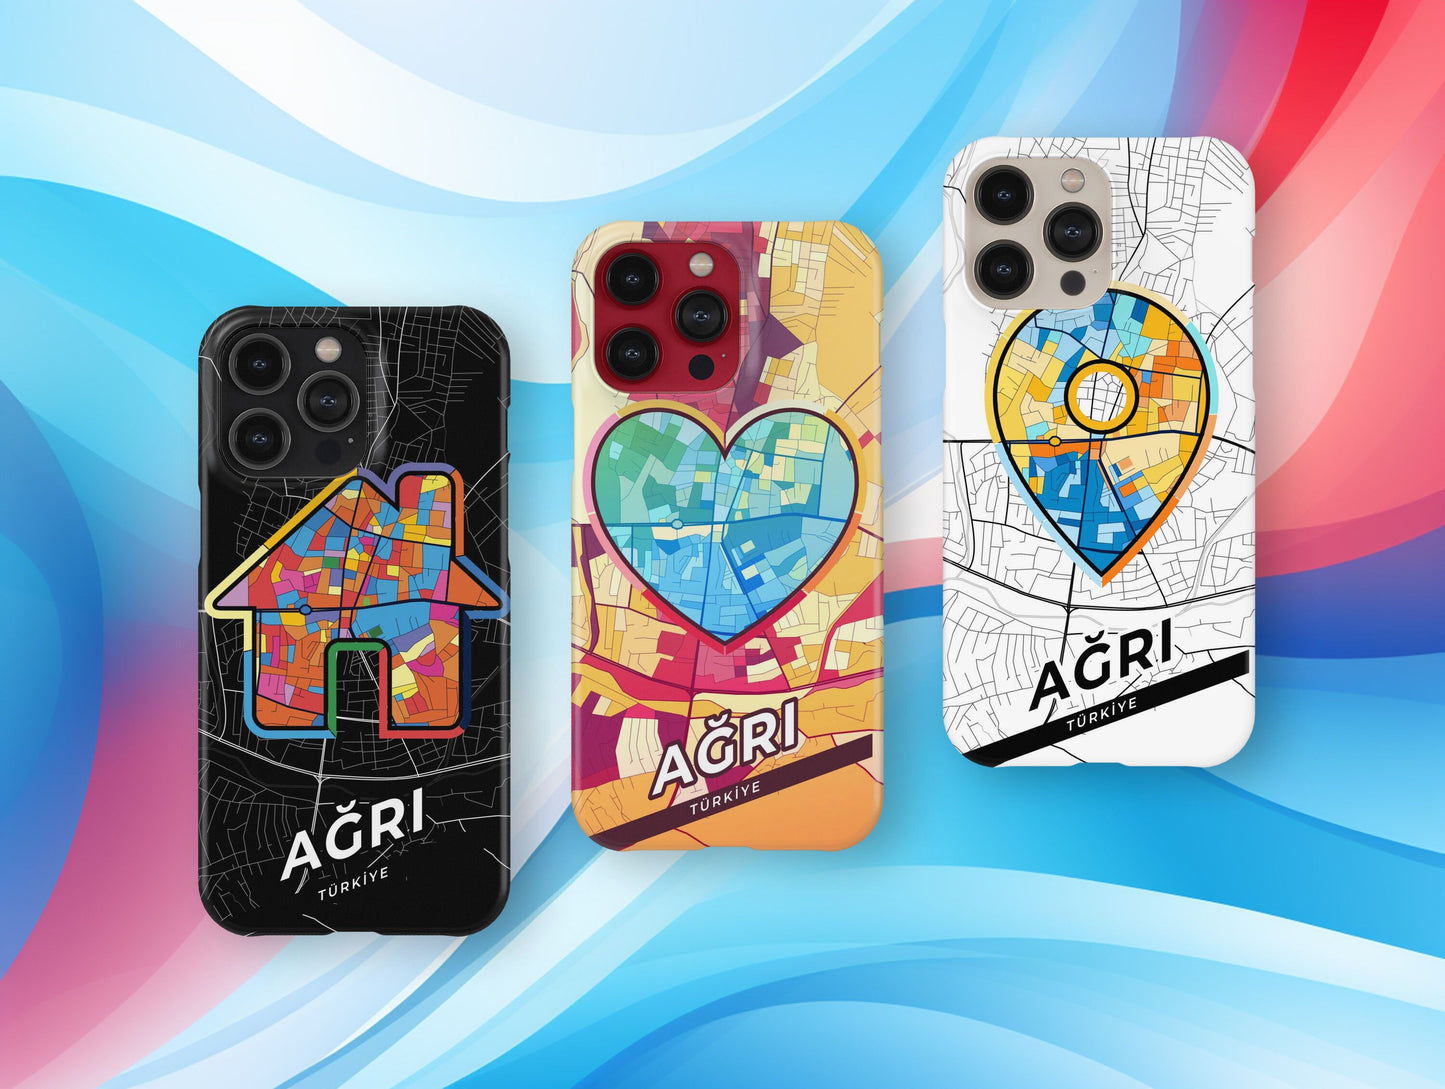 Ağrı Turkey slim phone case with colorful icon. Birthday, wedding or housewarming gift. Couple match cases.